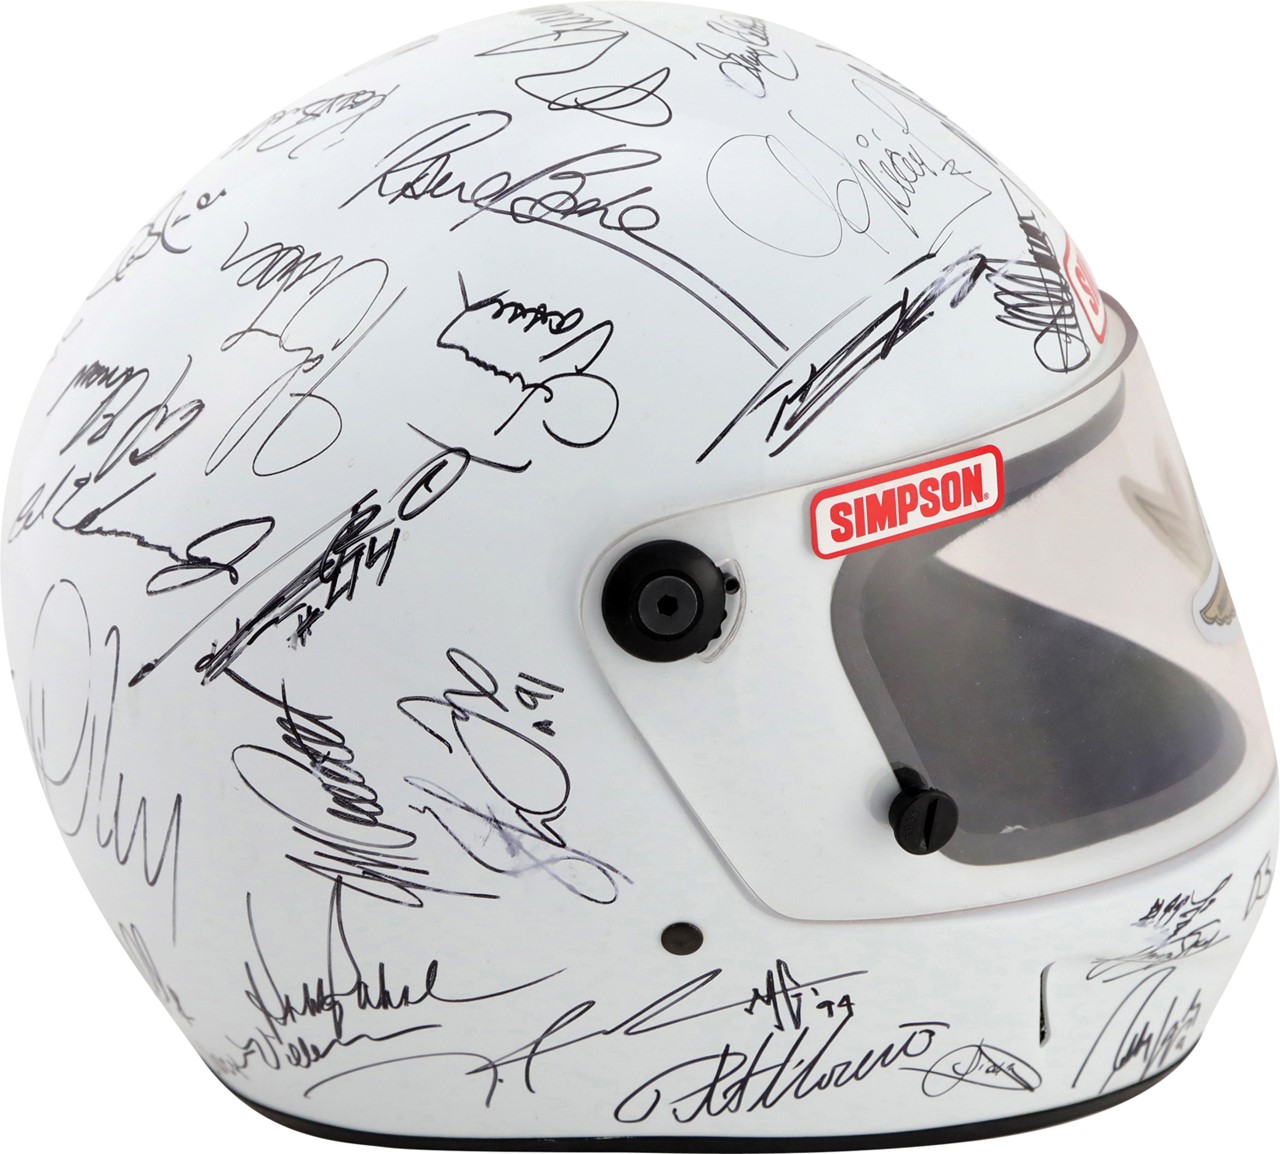 Olympics and All Sports - 1994 Indianapolis 500 Drivers Signed Helmet